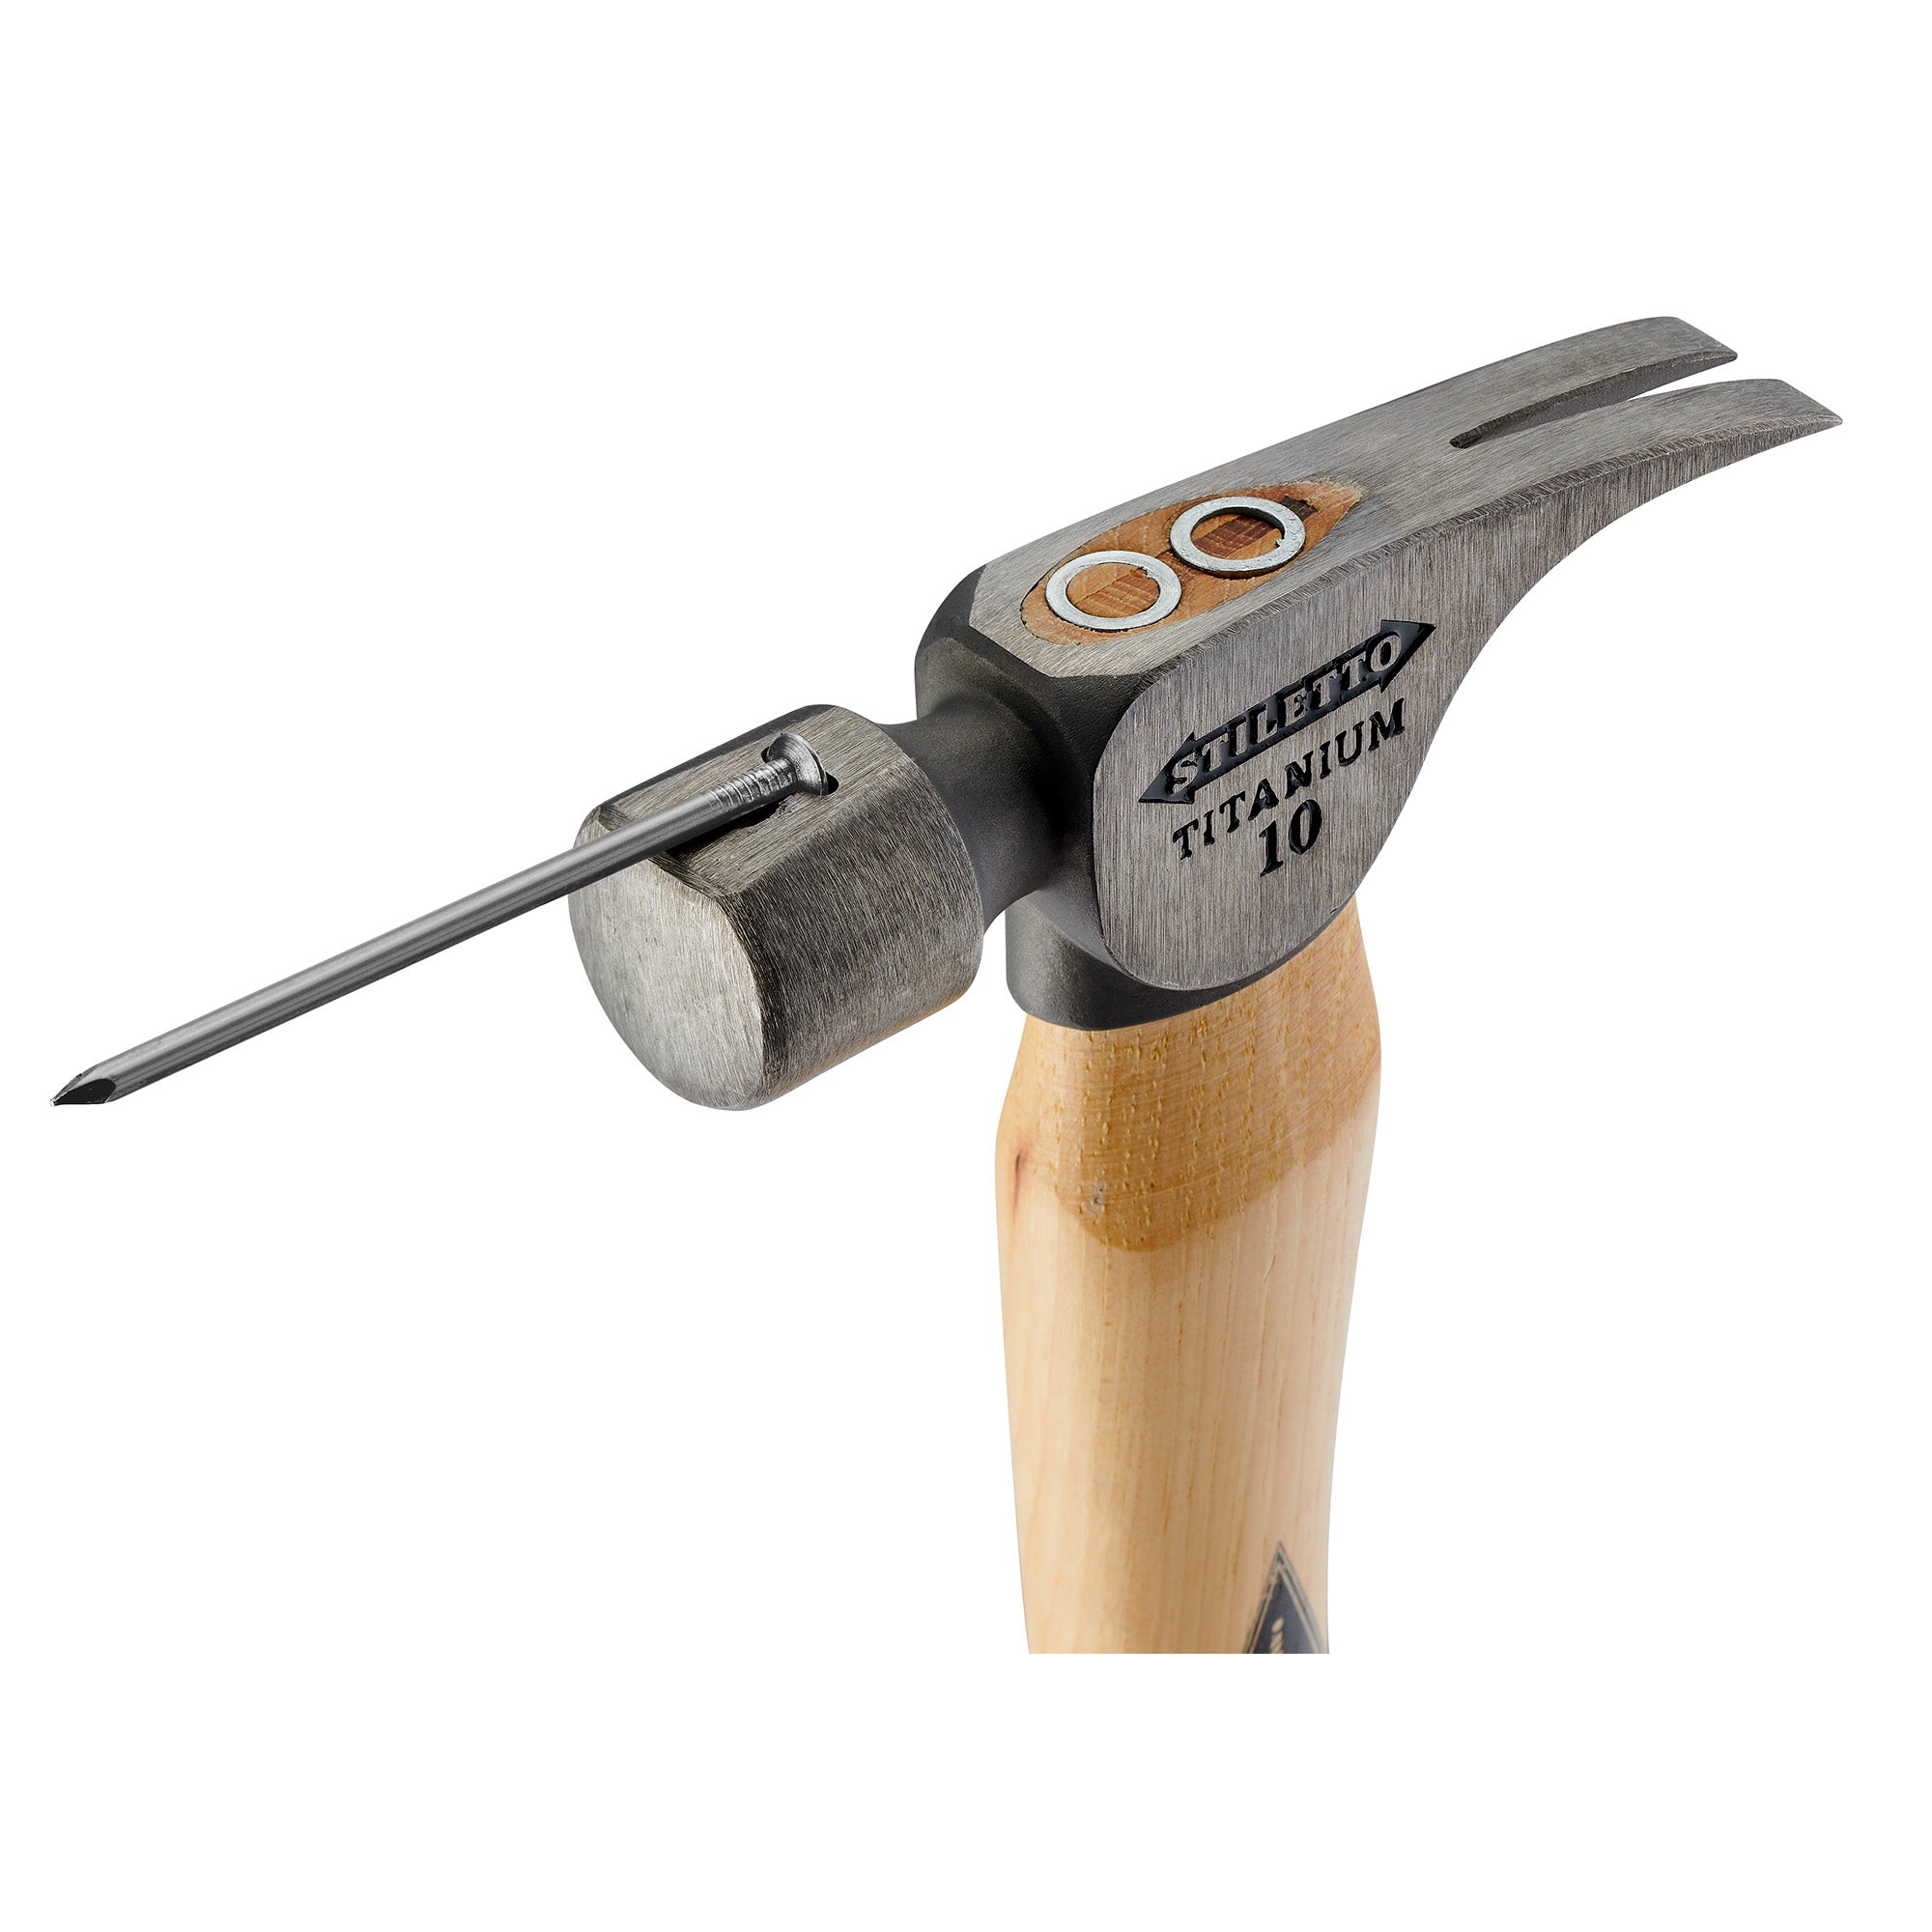 14-1/2" Hickory Straight Handle 10 oz. Titanium Head Smooth Round Face Straight Claw Finish Hammer